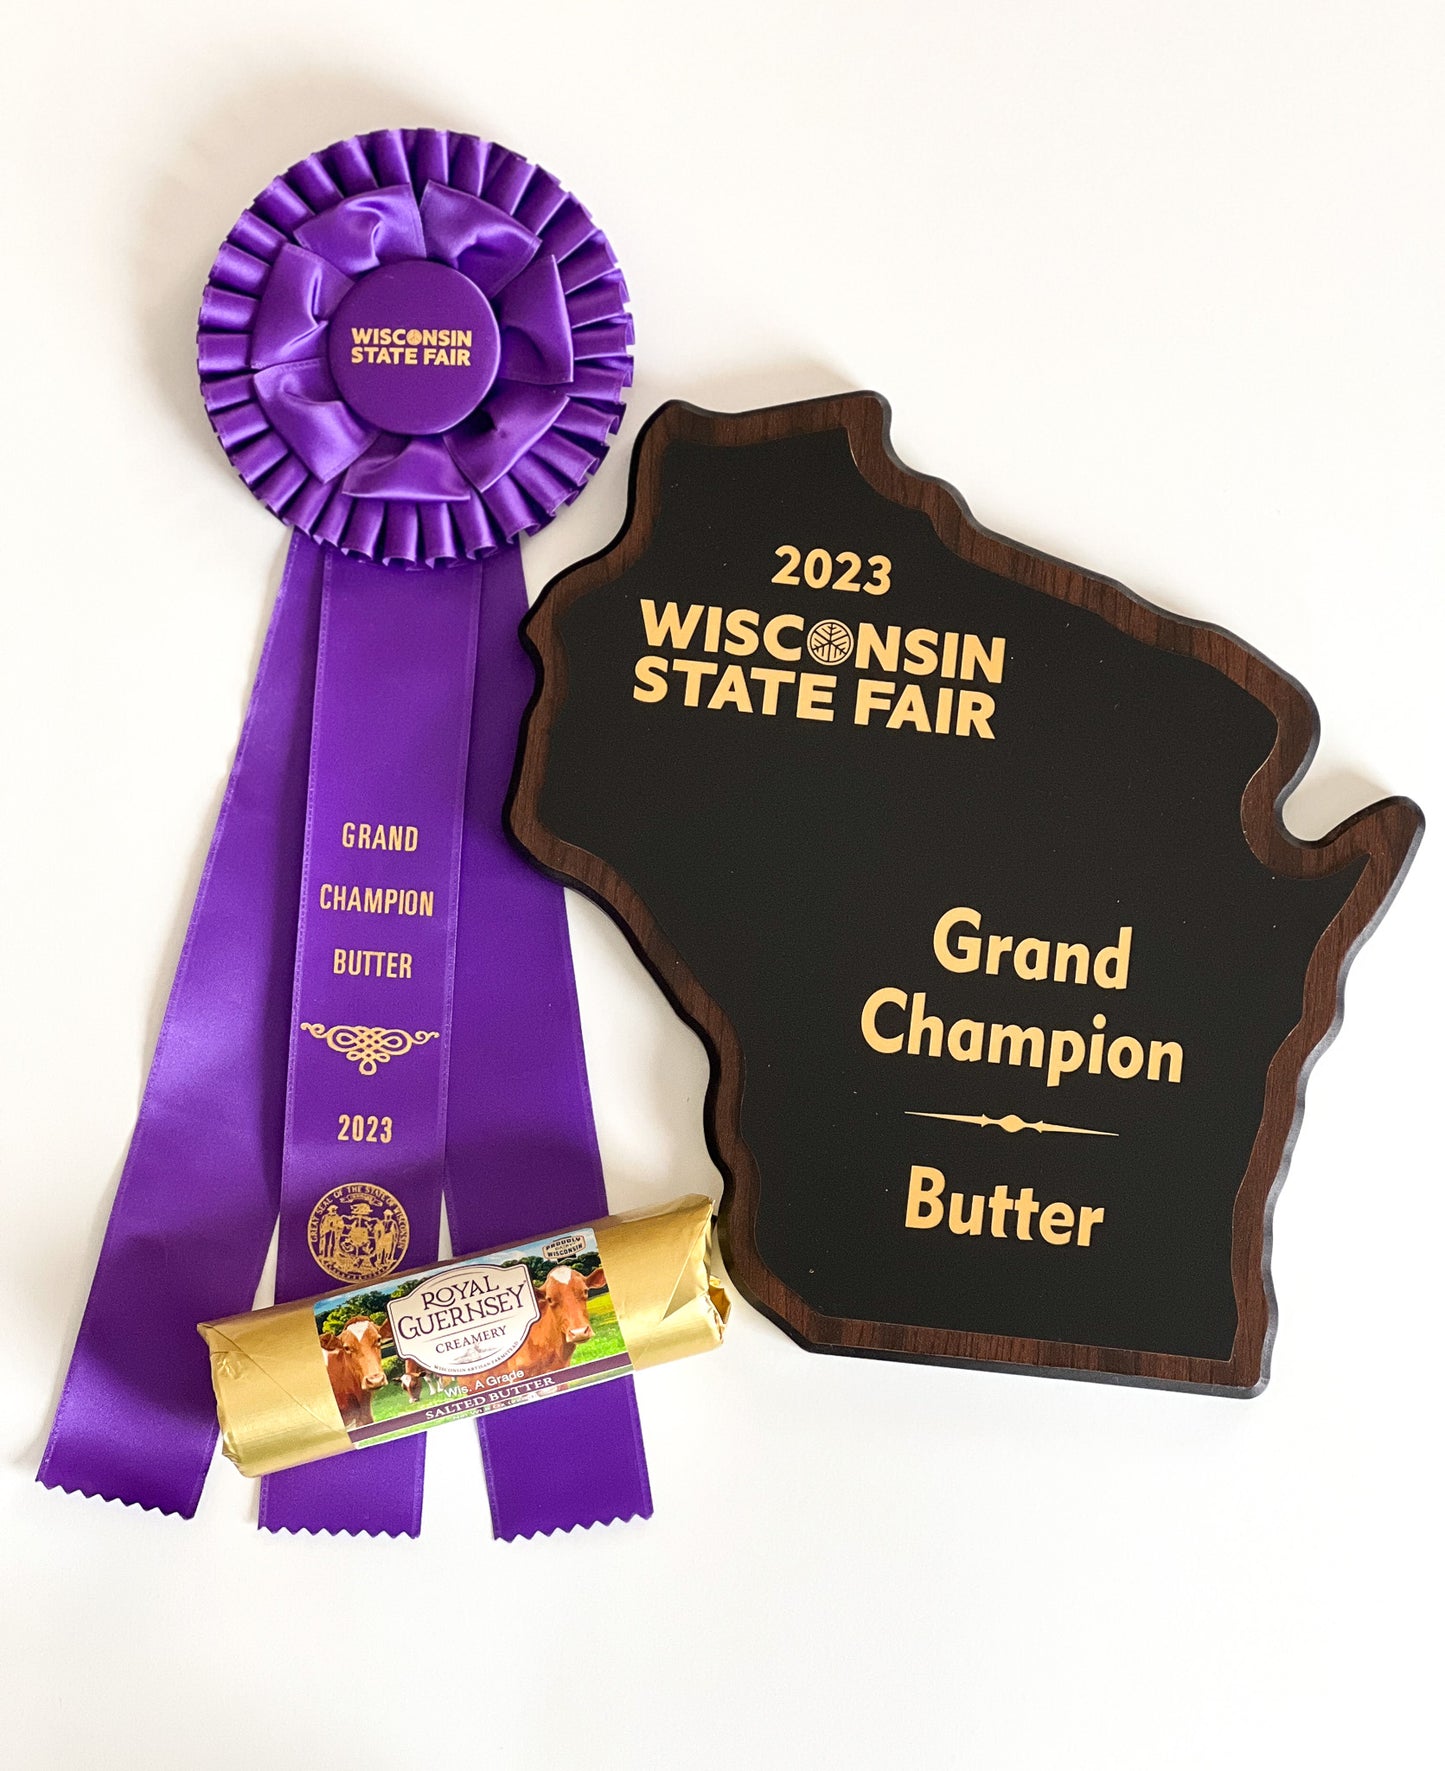 Salted Butter – Royal Guernsey Creamery